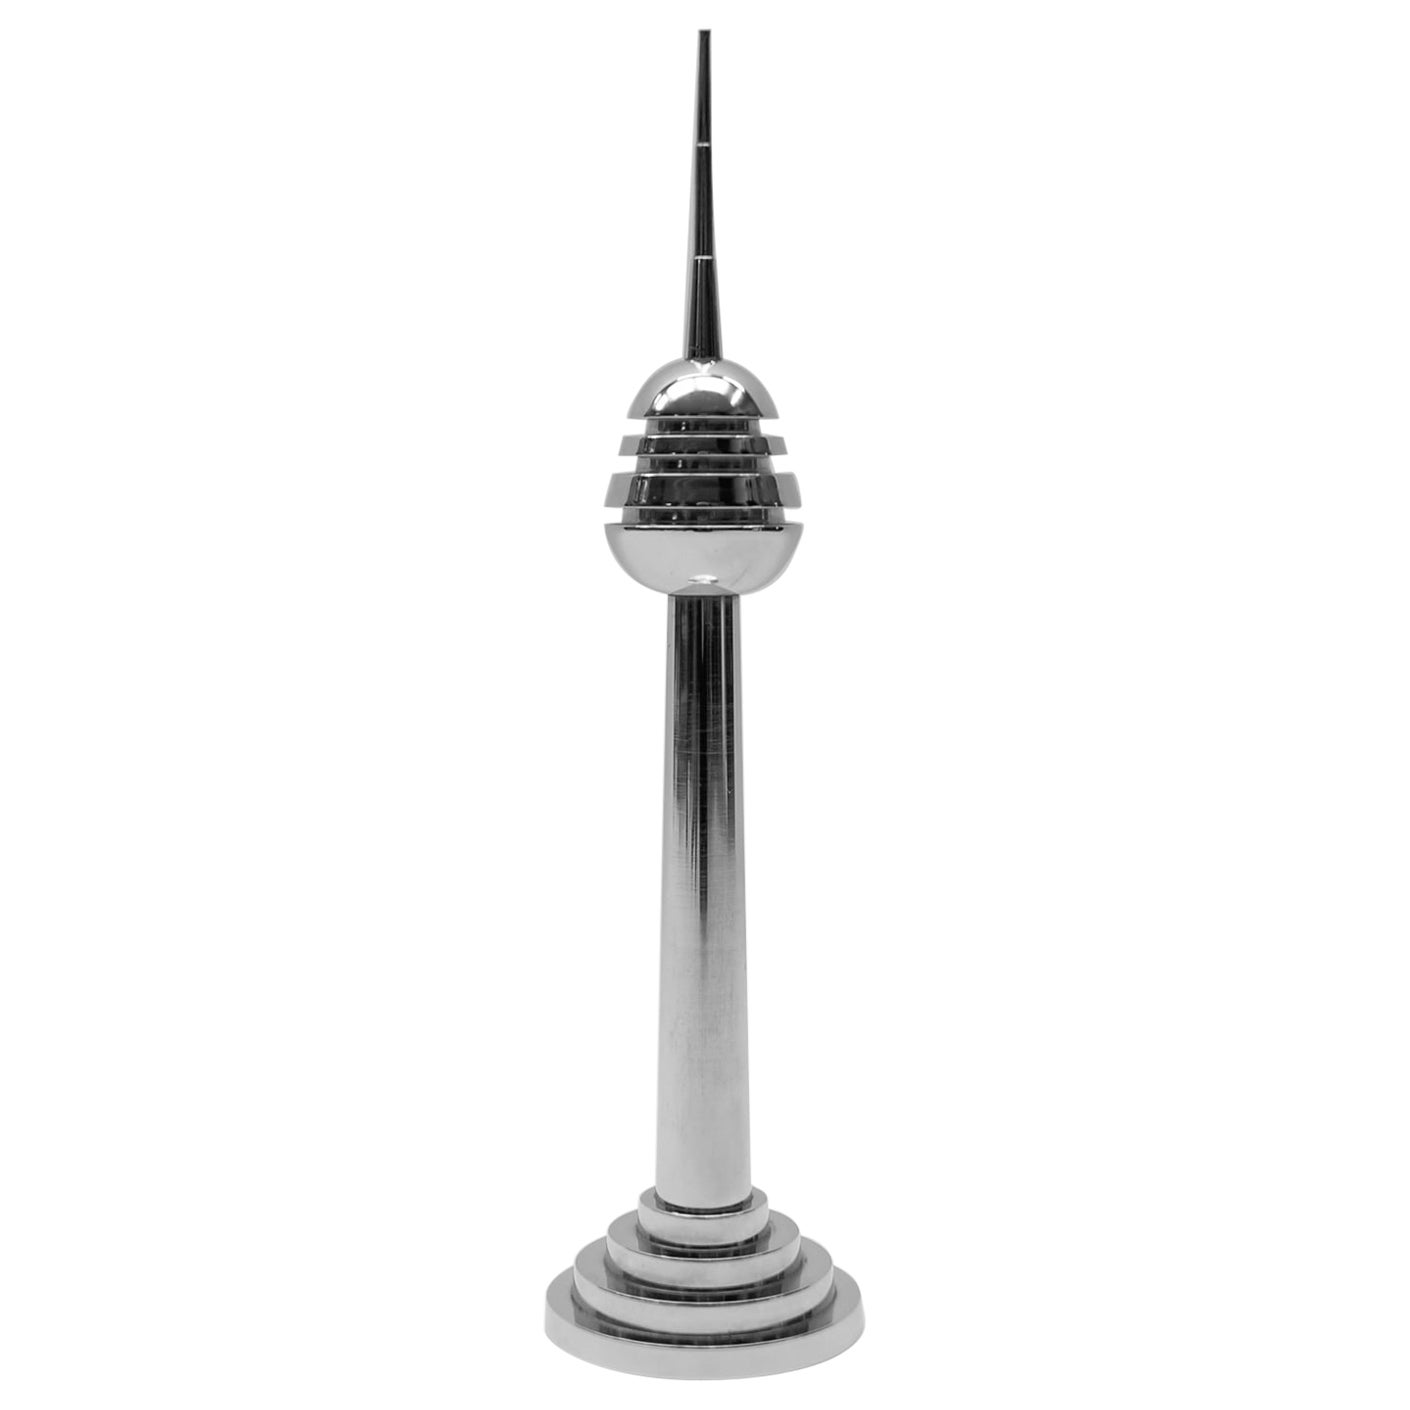 Large and Heavy Mid-Century Modern Tv-Tower Sculpture, 1970s